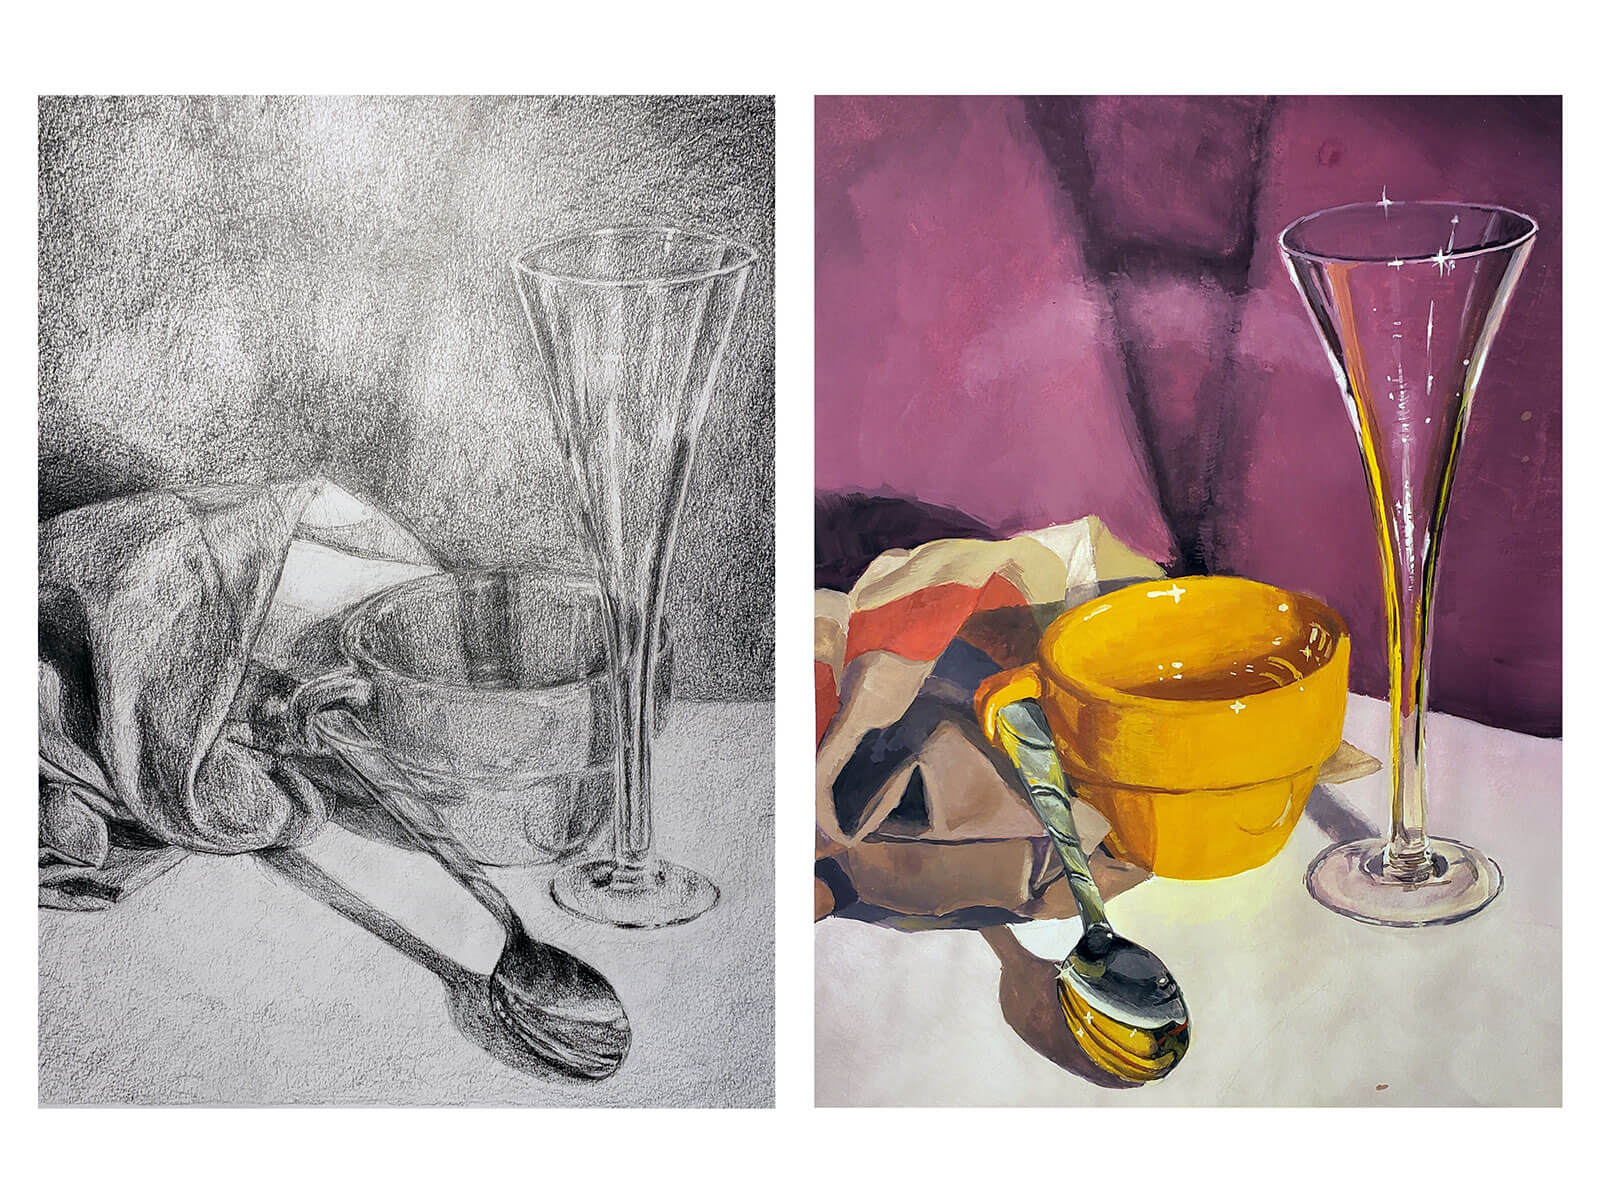 Still-life with mug, spoon, and glass, in black and white and color